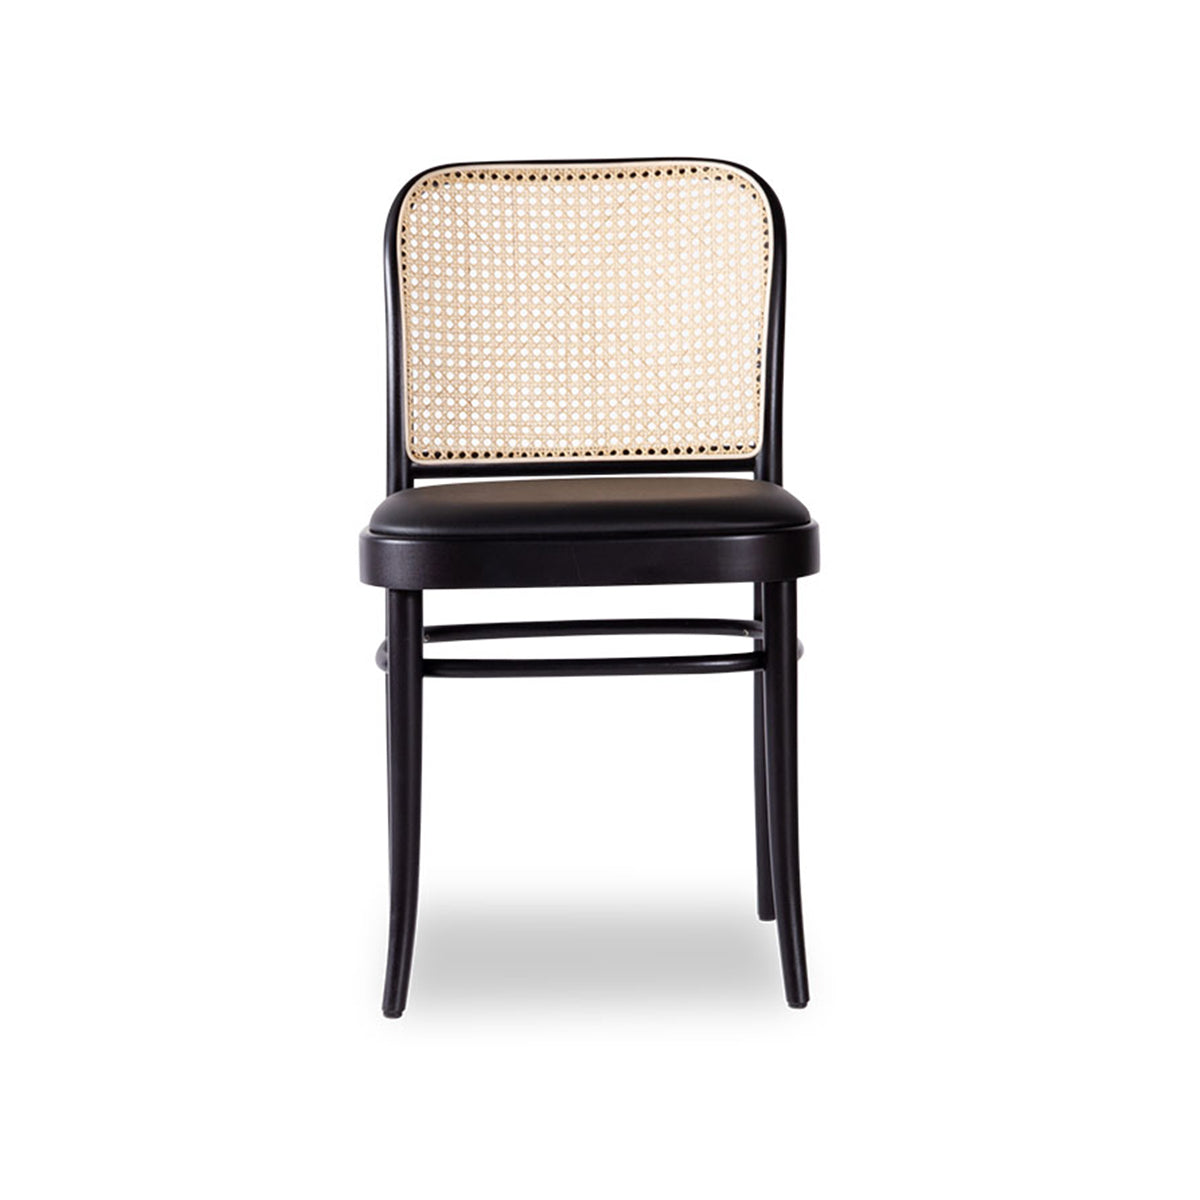 811 Hoffmann Chair - Padded Seat/Cane Backrest (Black Stain).